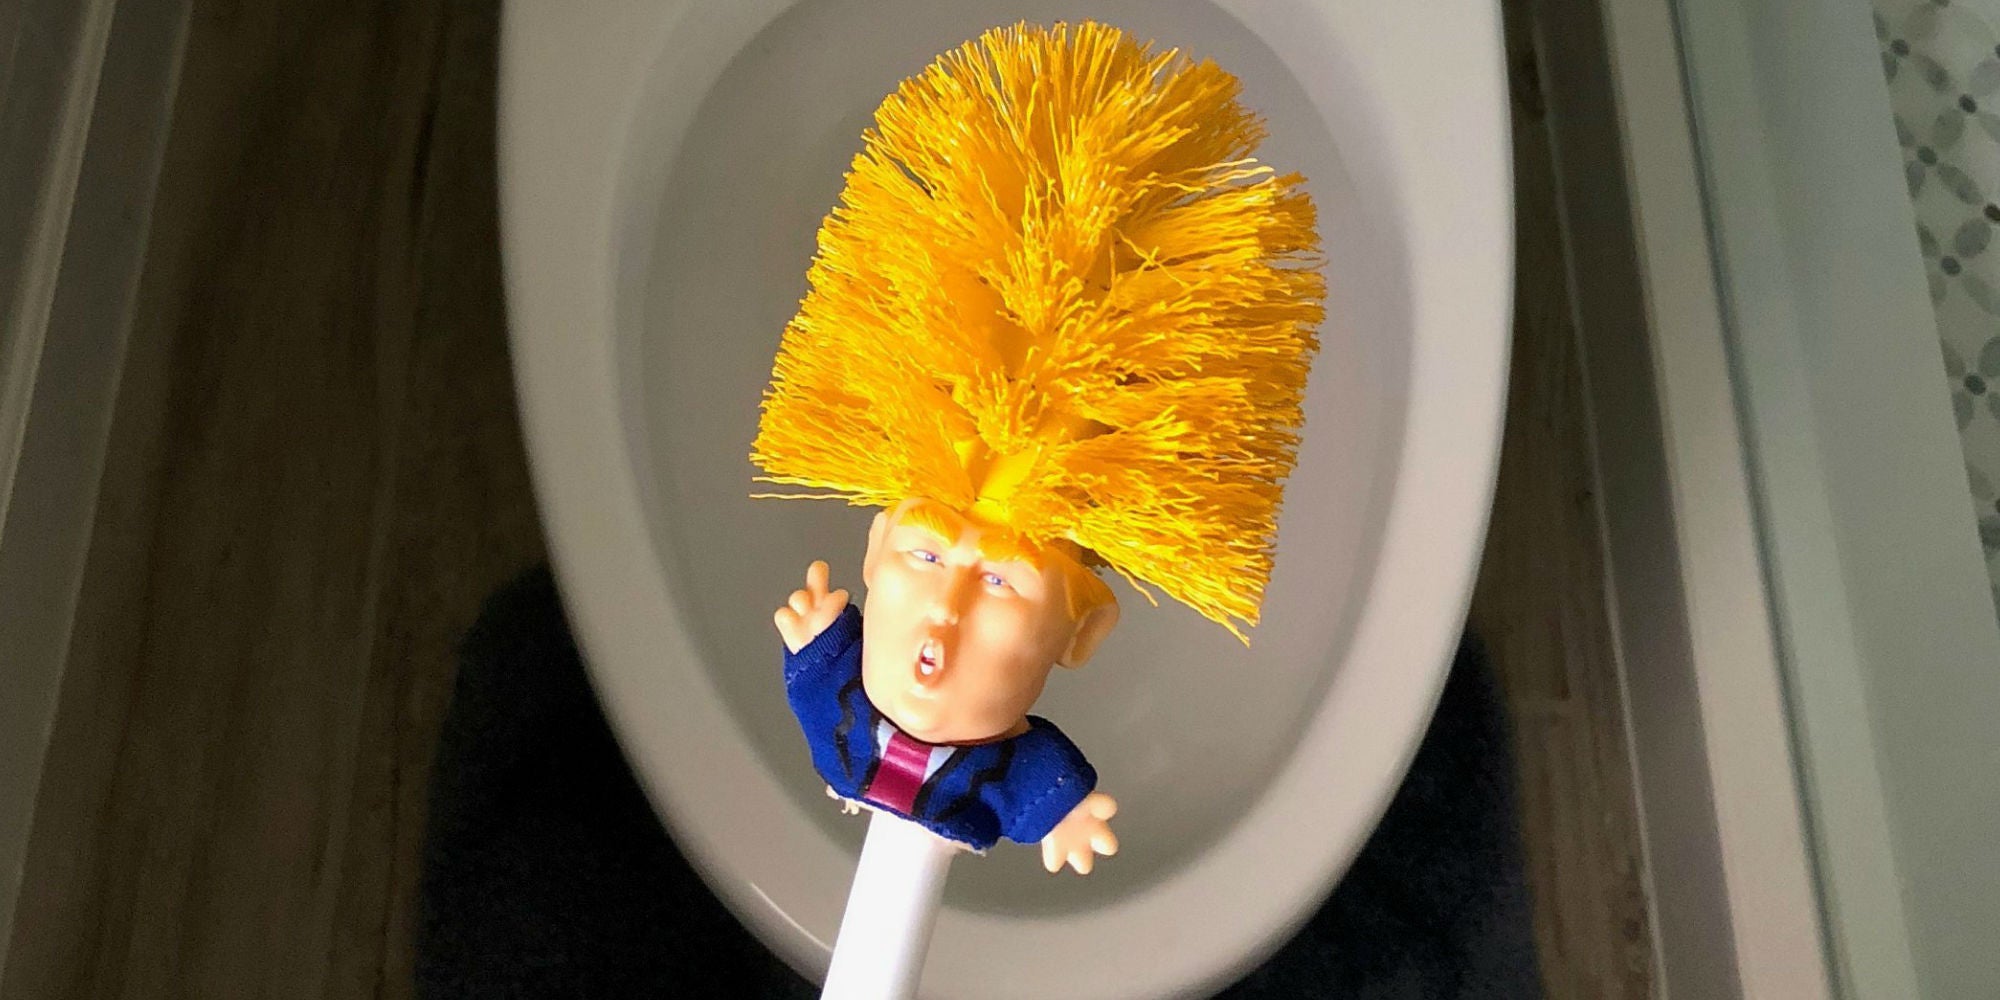 You can now buy a Donald Trump toilet brush as a perfect election day treat  | indy100